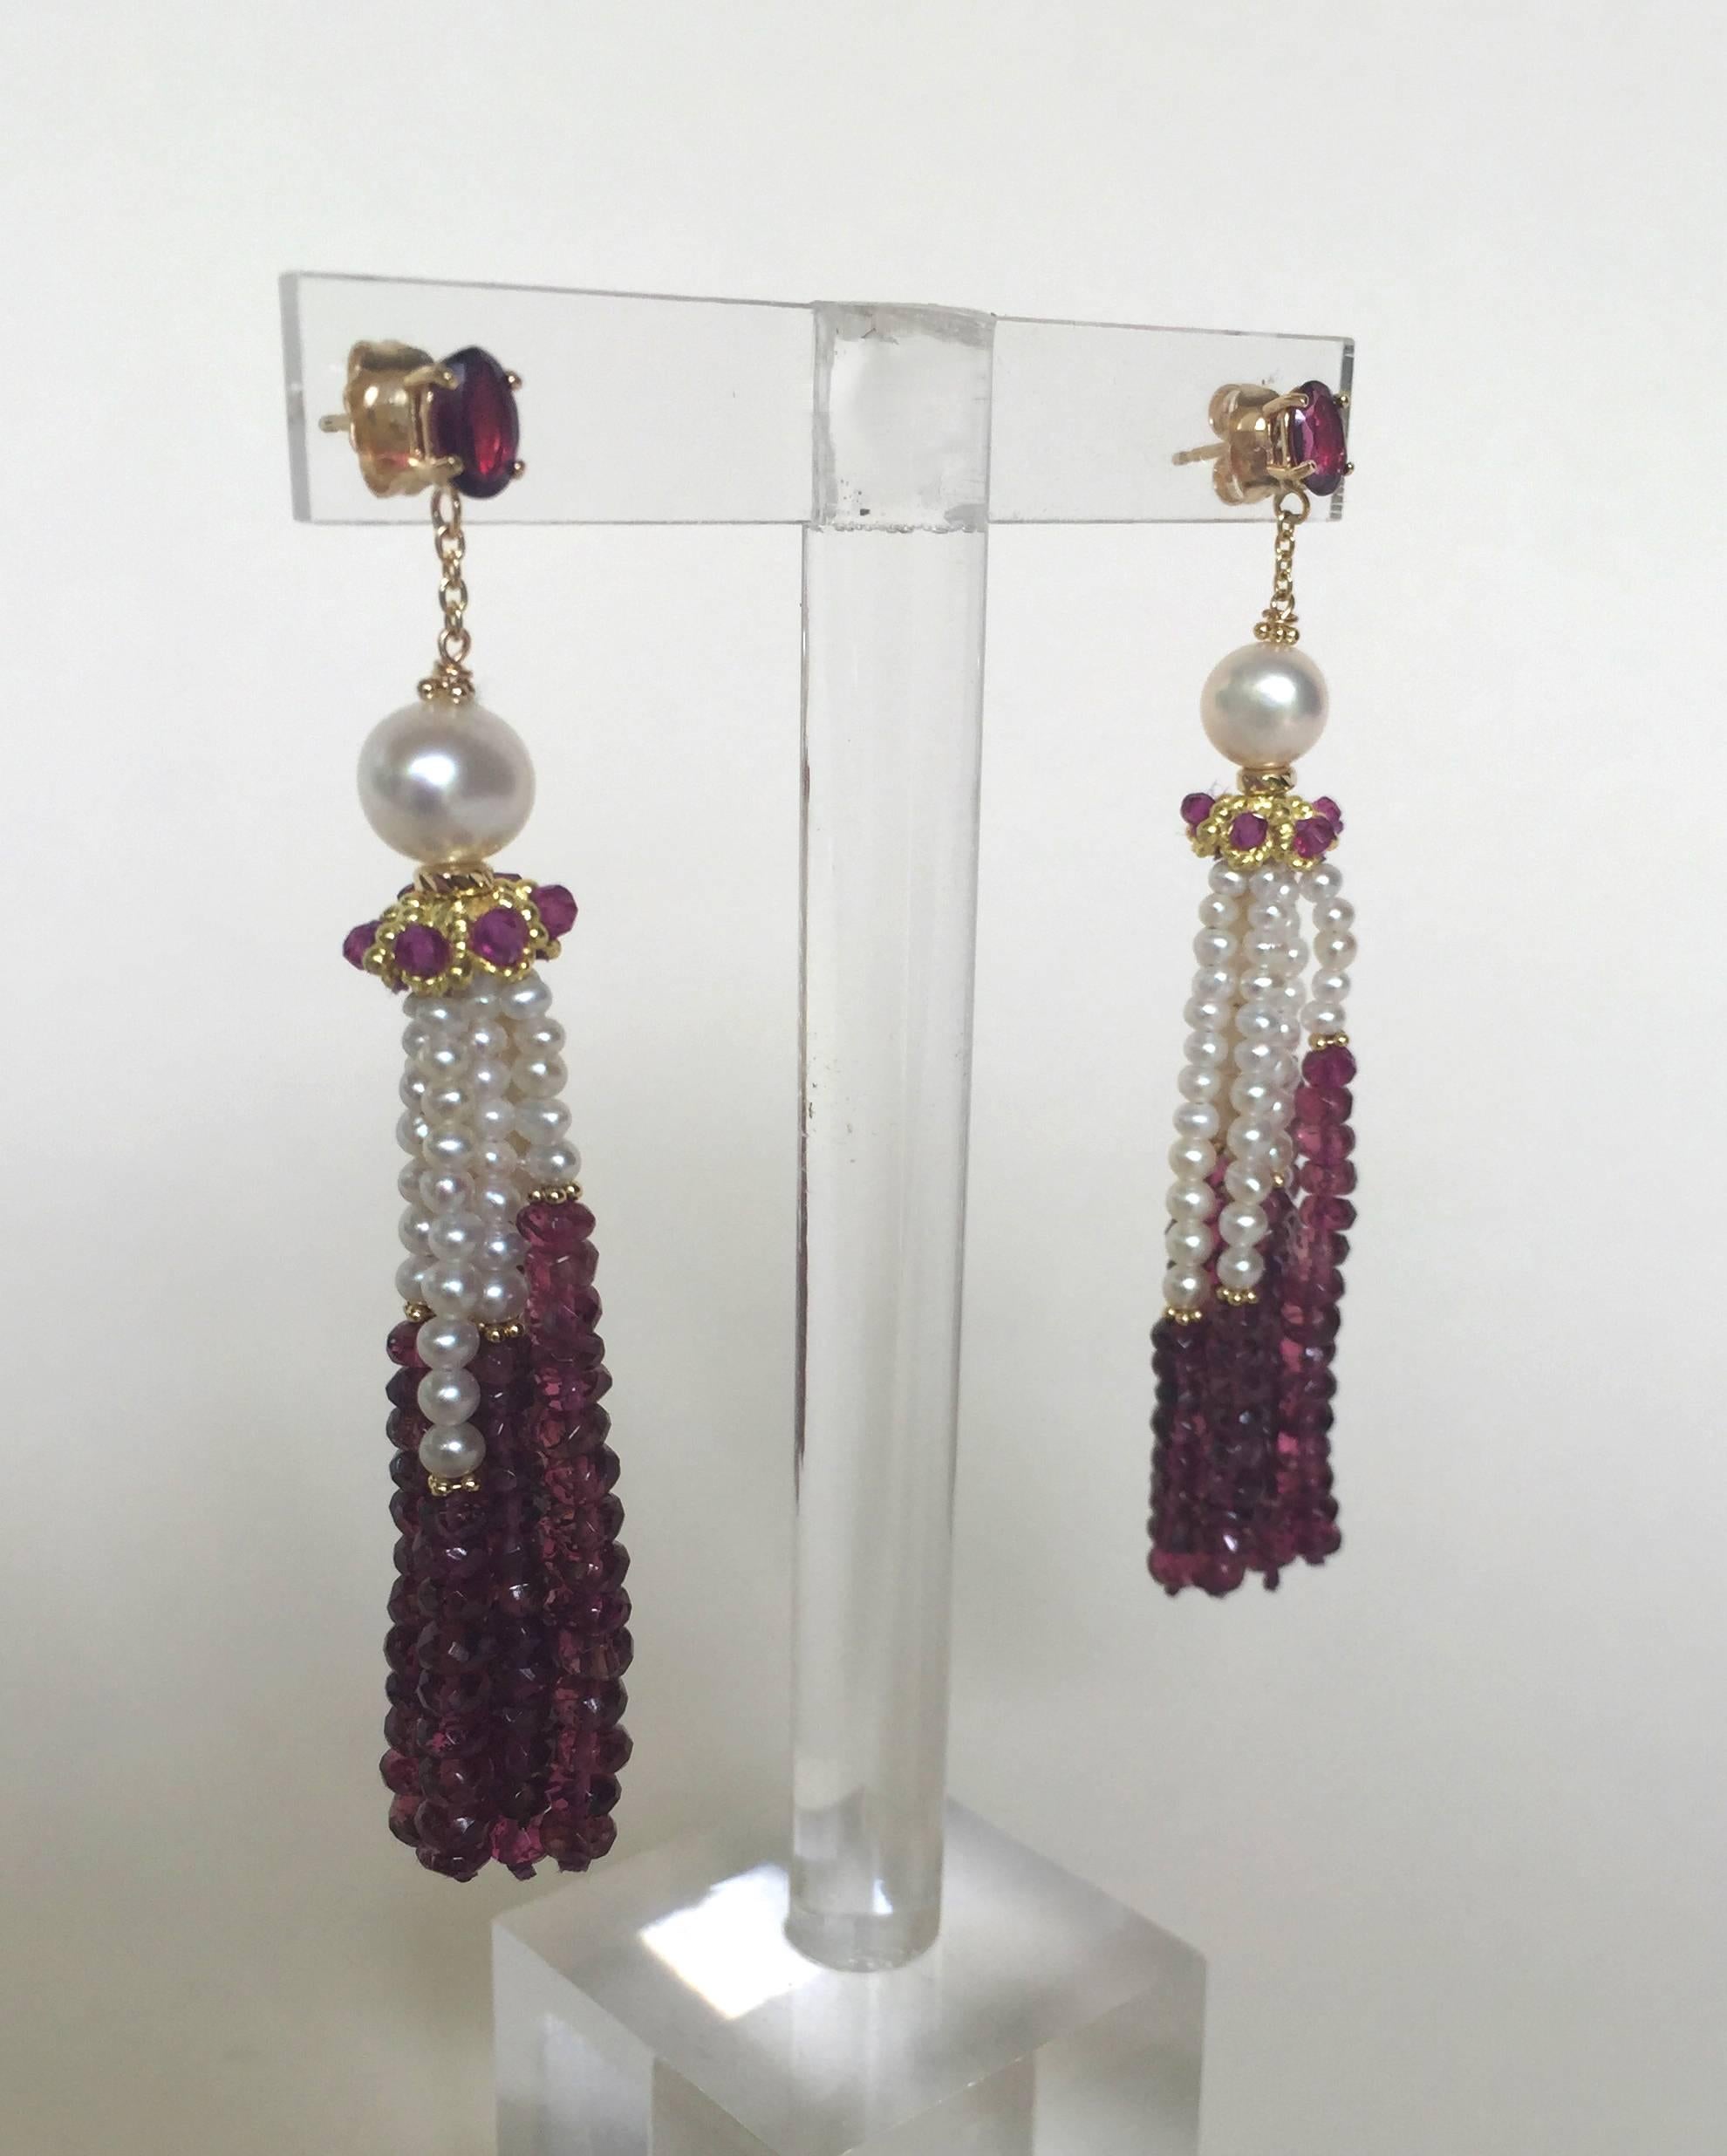 The graduated pearl and faceted garnet strands of these tassel earrings are highlighted by 14k yellow gold beads. A 14k gold cup with shimmering faceted garnet beads running through holds the earring together. On top is an elegant round white pearl